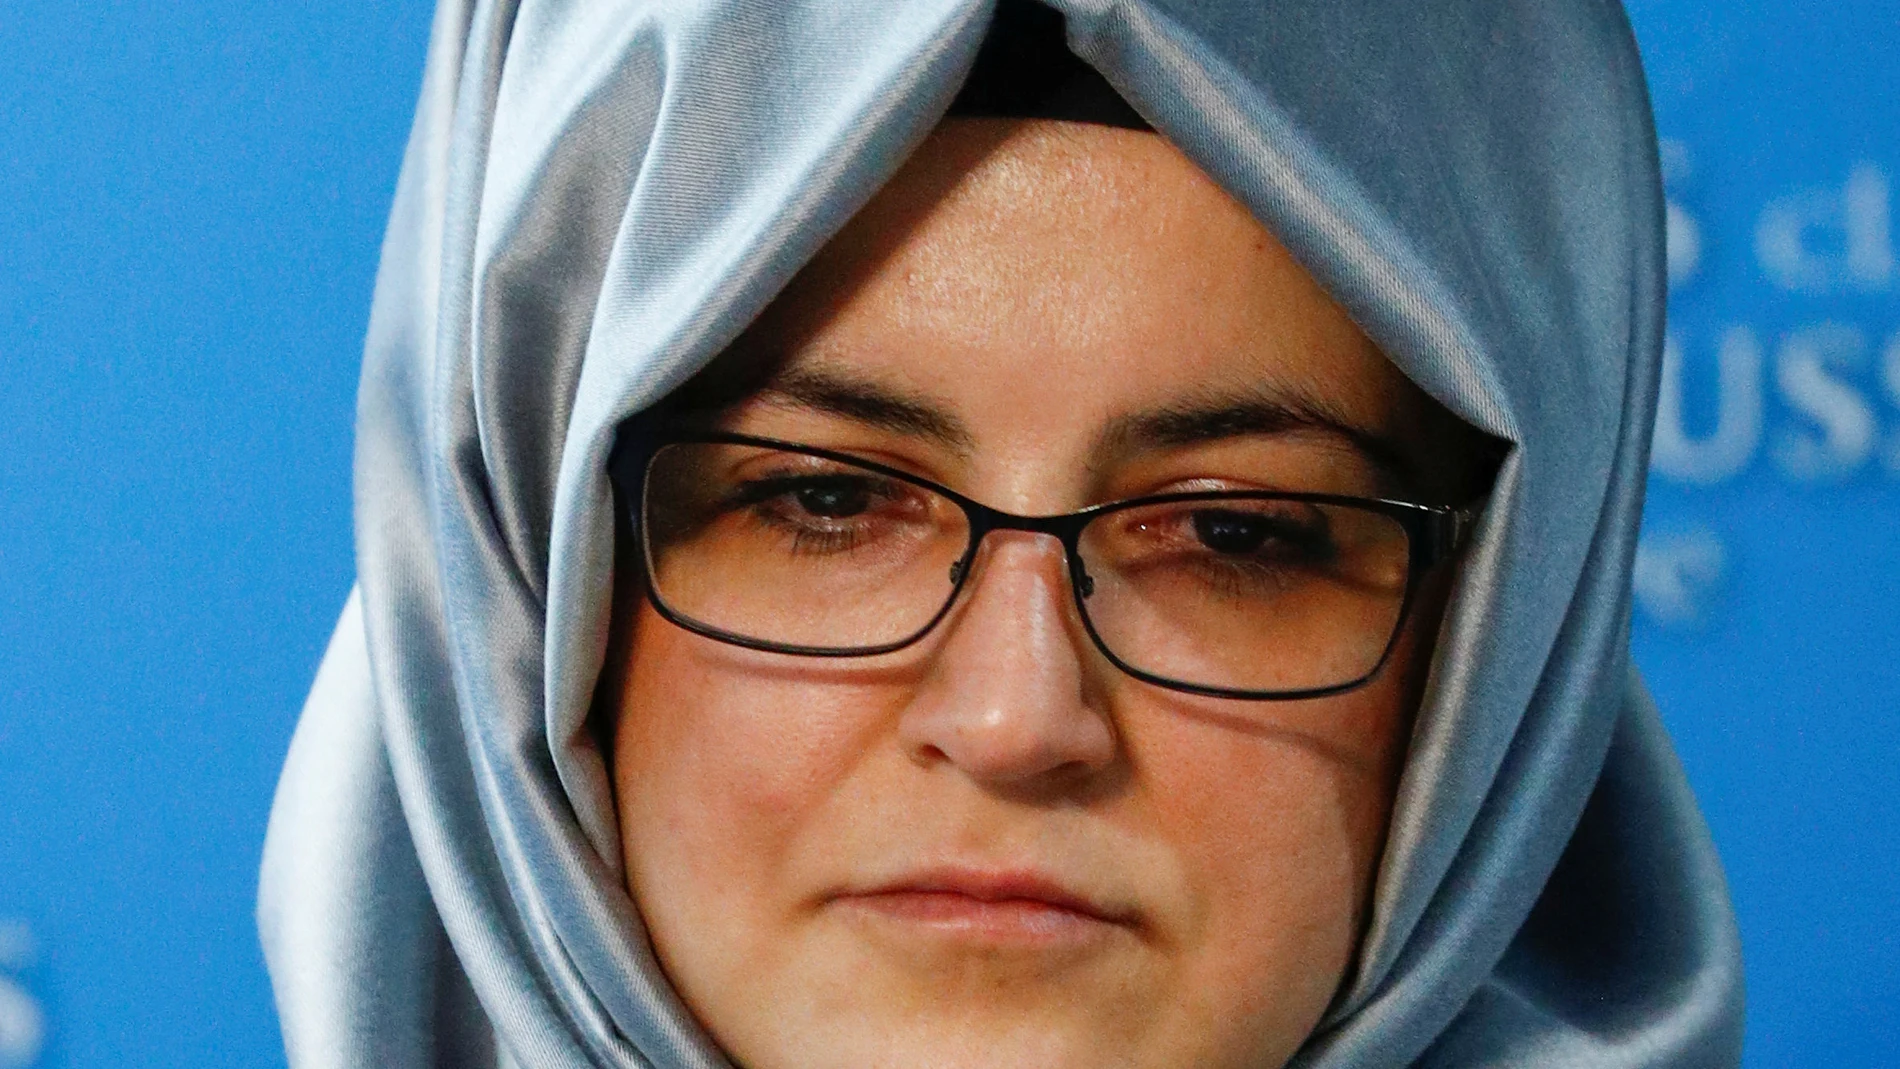 Cengiz, the fiancee of murdered journalist Jamal Khashoggi, attends a news conference in Brussels